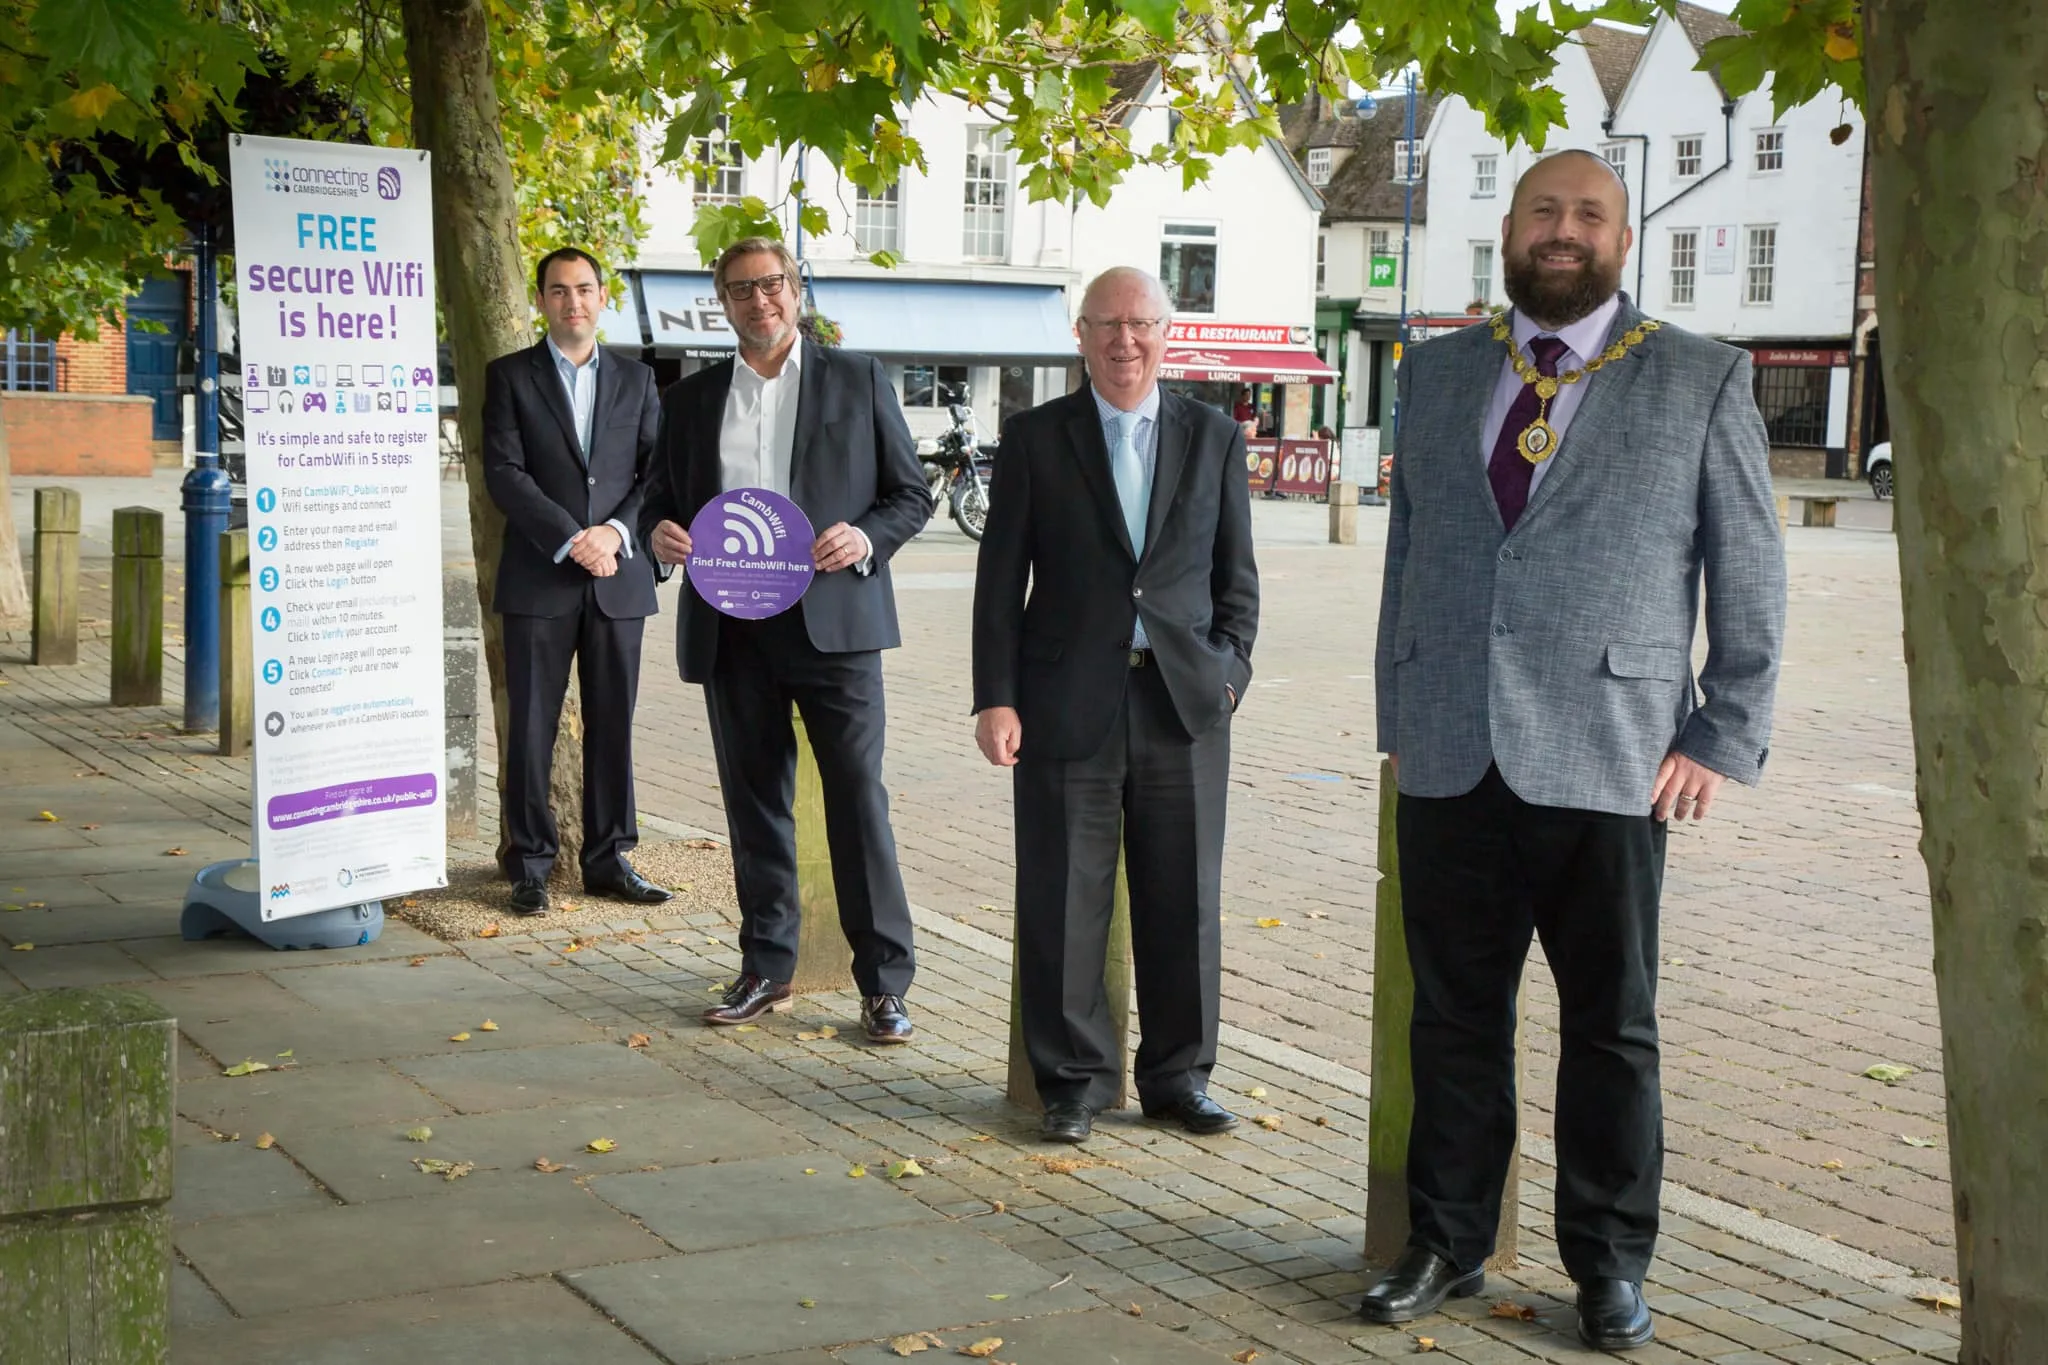 Wifi coming to town celebrations. Cllr Ryan Fuller with Conservative colleagues including then Mayor James Palmer